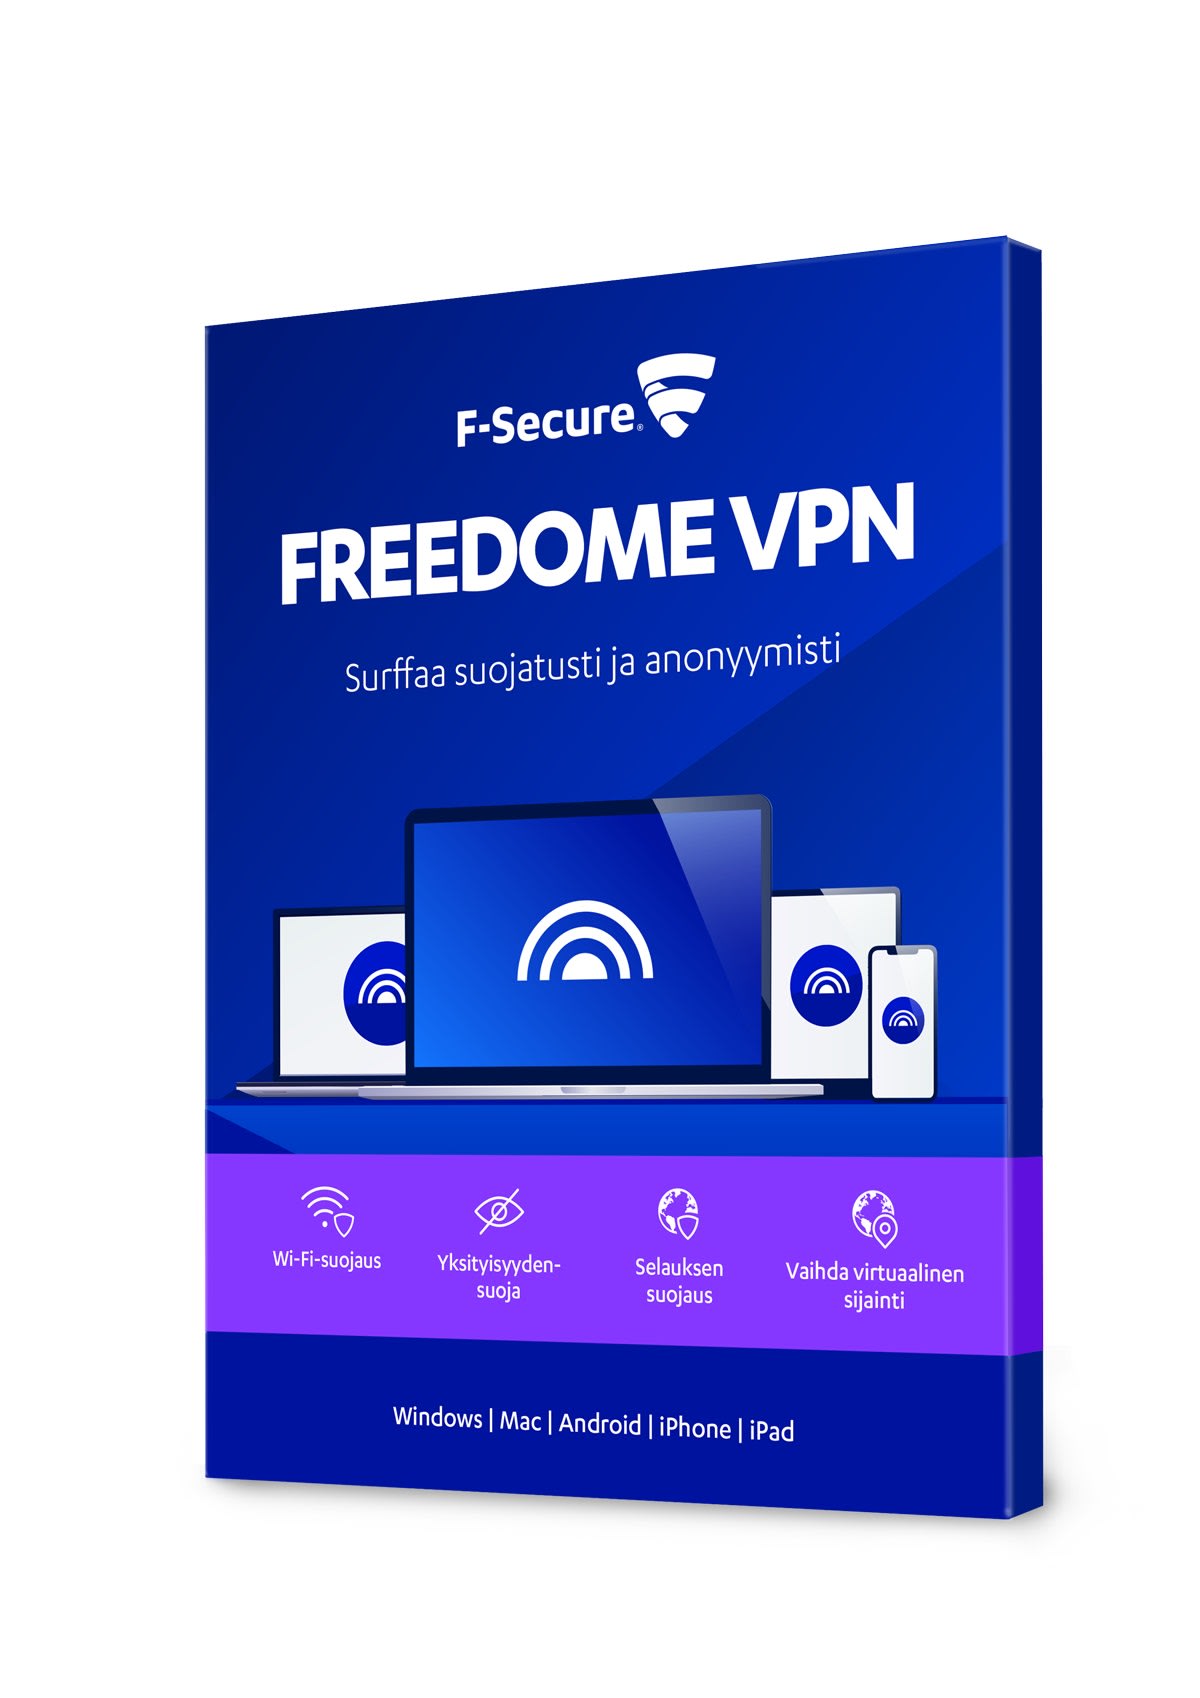 download the last version for apple F-Secure Freedome VPN 2.69.35